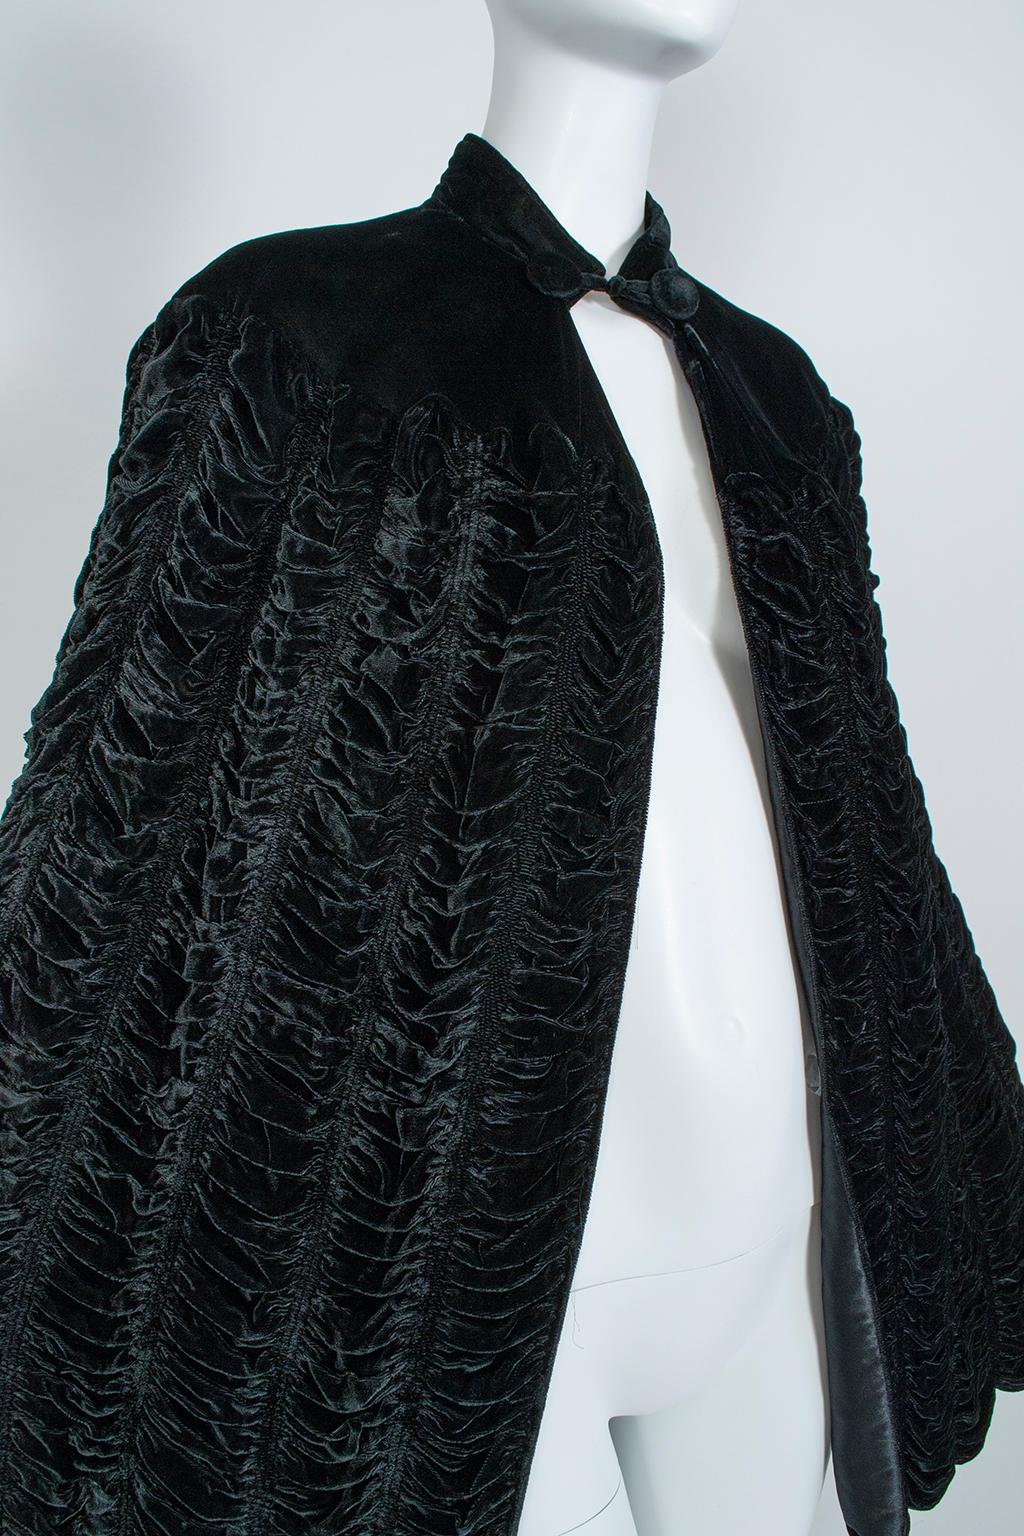 Black Regency Ruched and Scalloped Silk Velvet Pelerine Mantle Cape - S-M, 1930s In Excellent Condition For Sale In Tucson, AZ